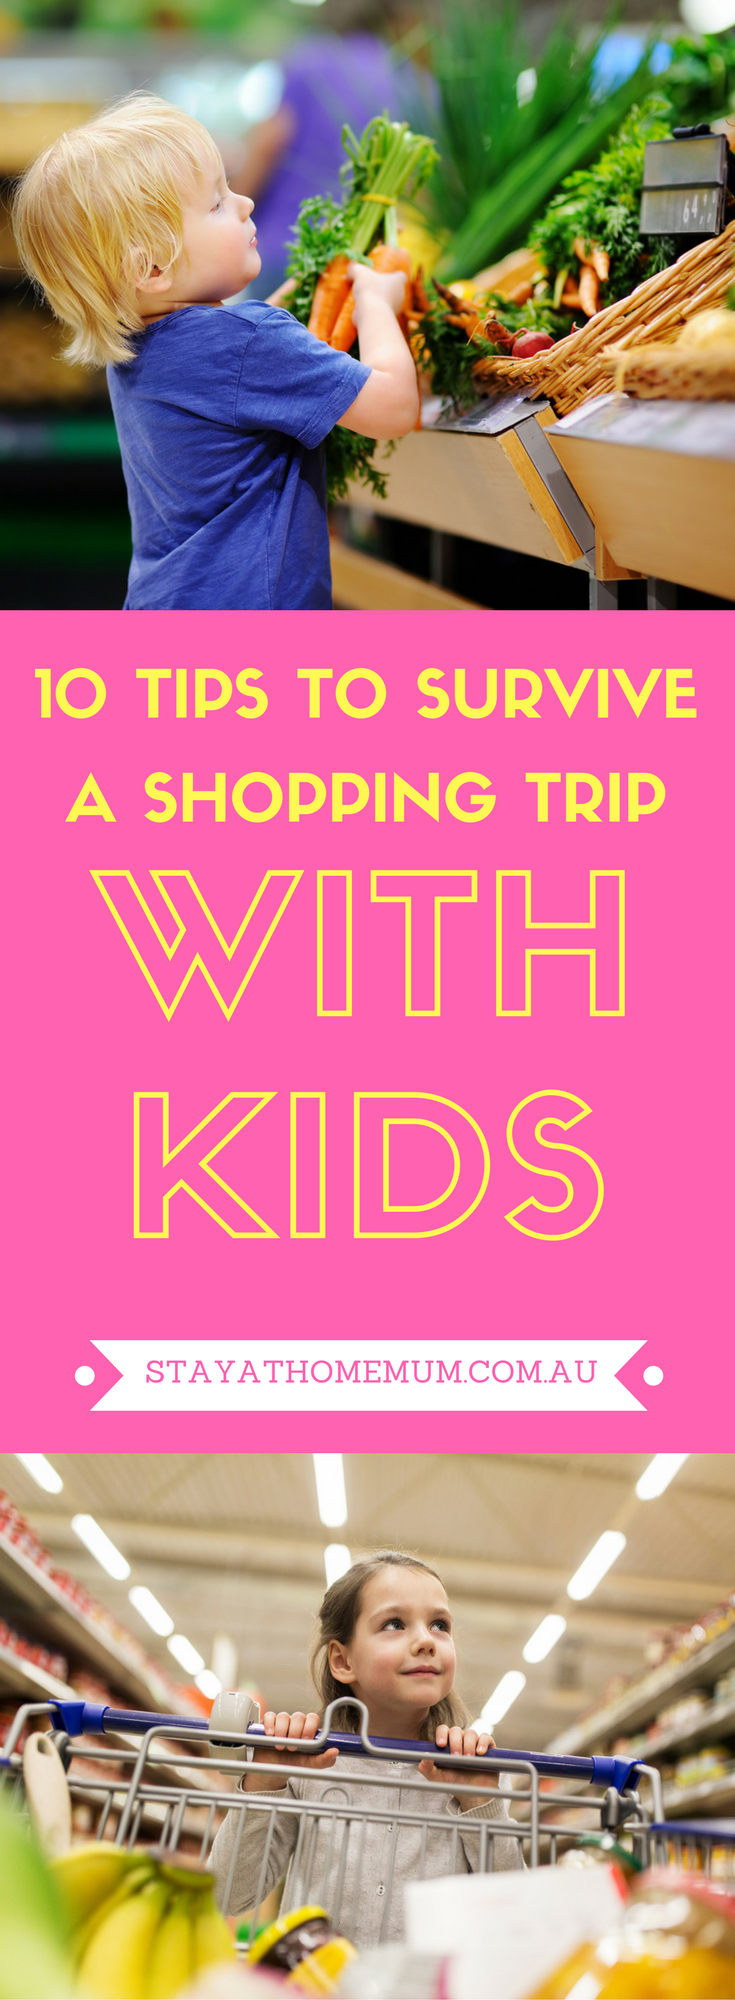 10 Tips To Survive A Shopping Trip With Kids